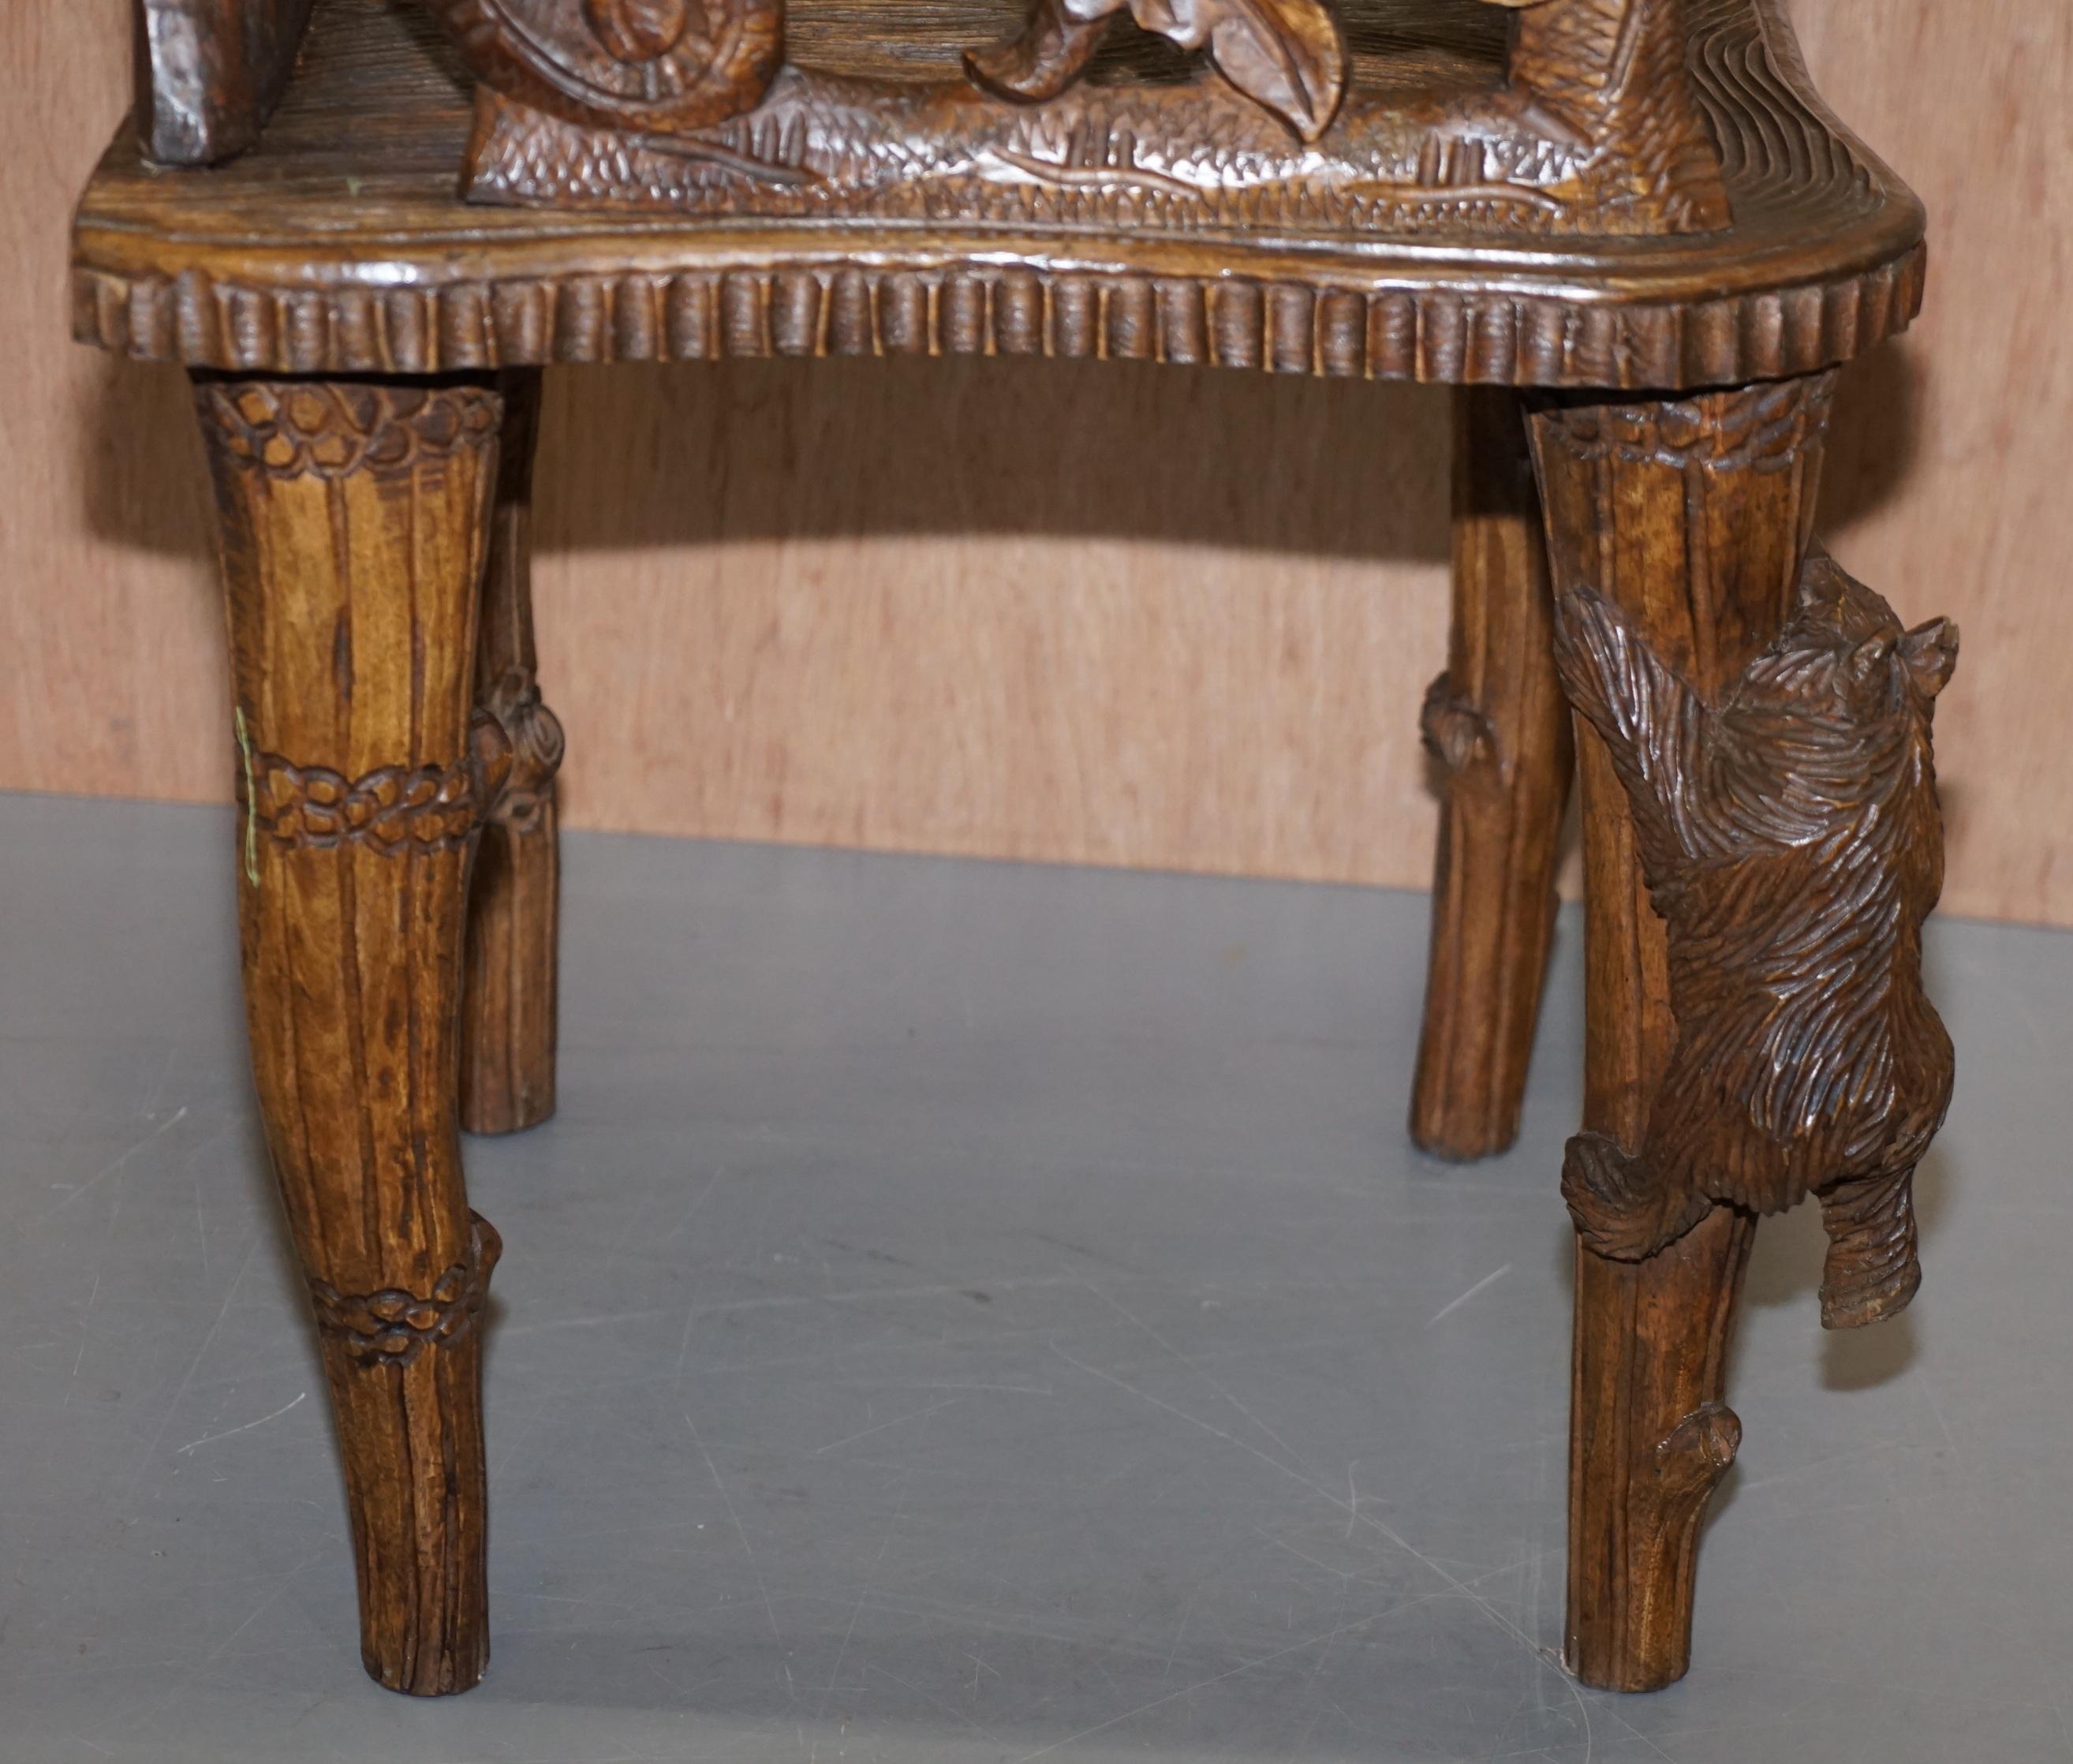 Vintage Hand Carved Black Forest Wood Bear Armchair with Bears Climbing the Legs 11